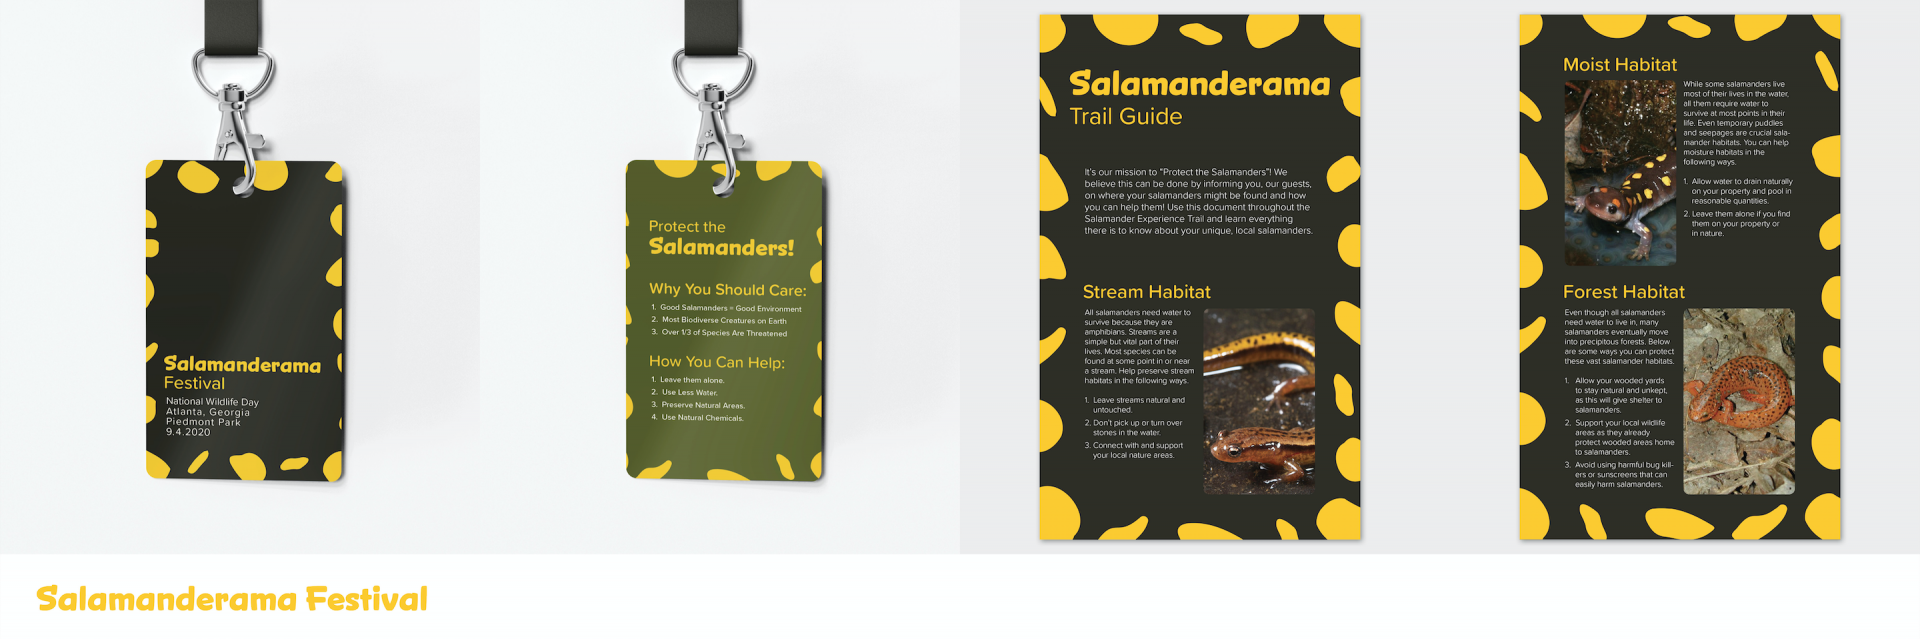 Several photos of laniard card and a info sheet about the salamander festival.